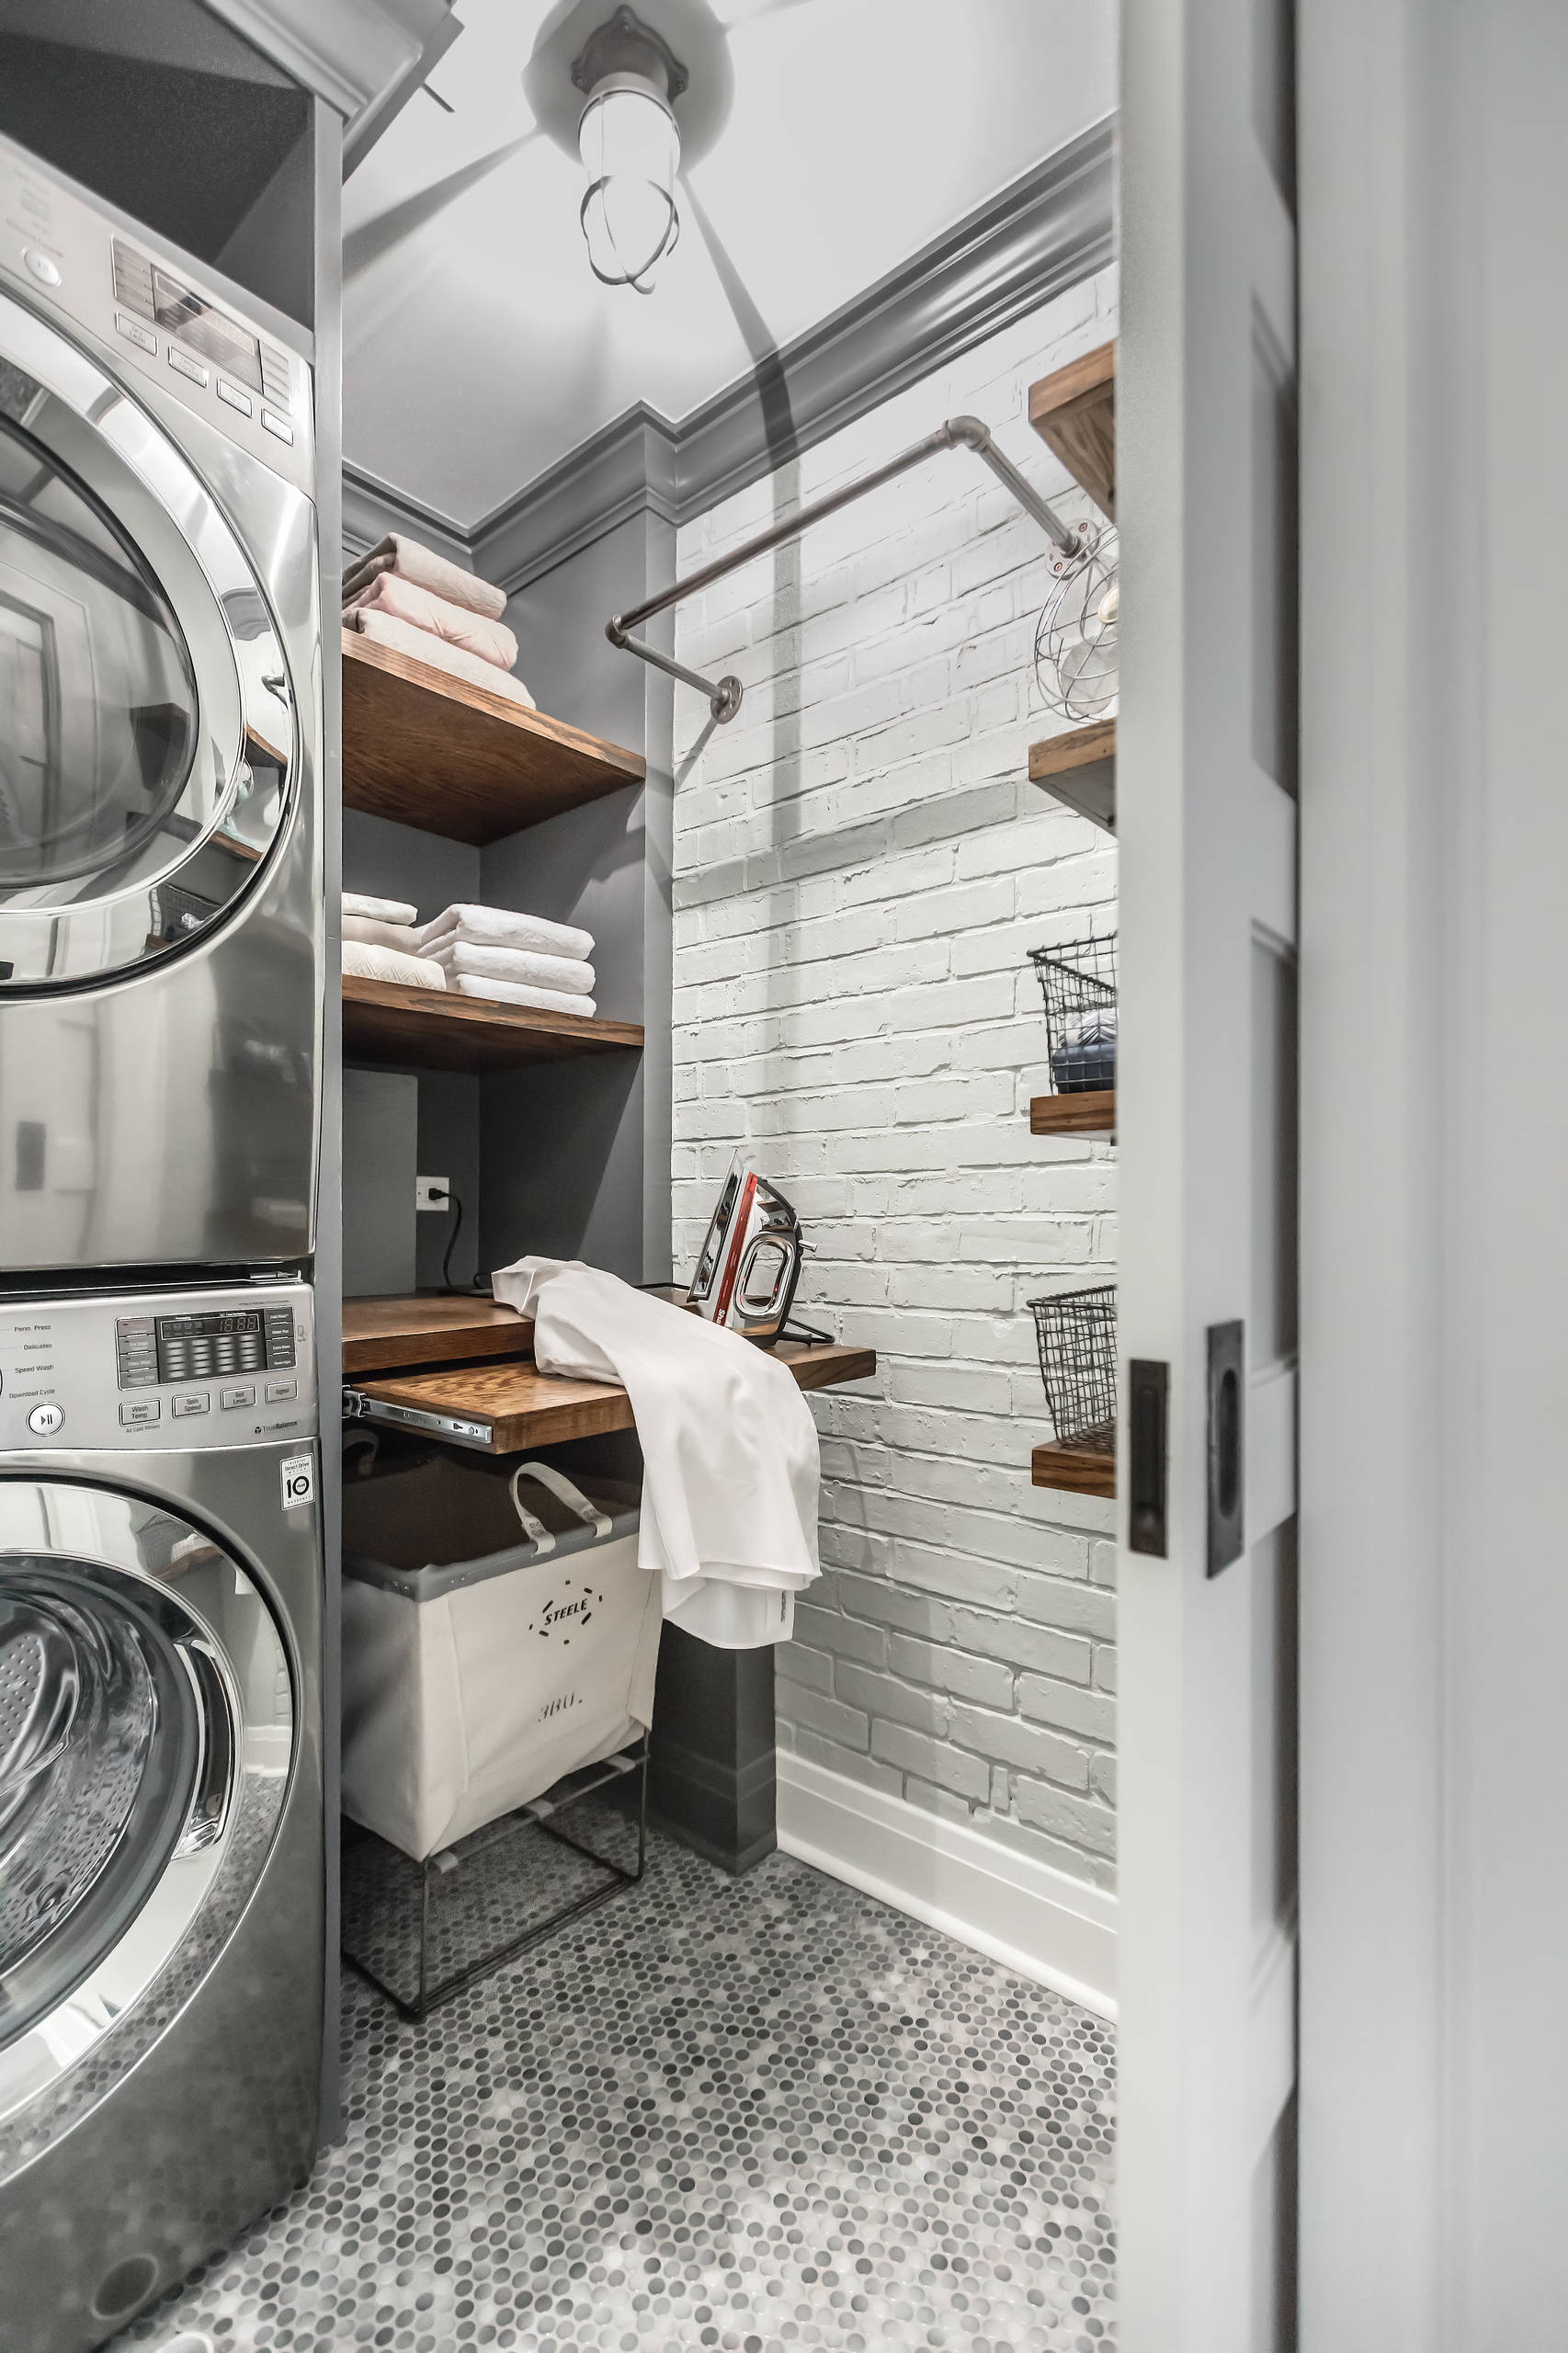 75 Laundry Room Ideas You'll Love - August, 2023 | Houzz